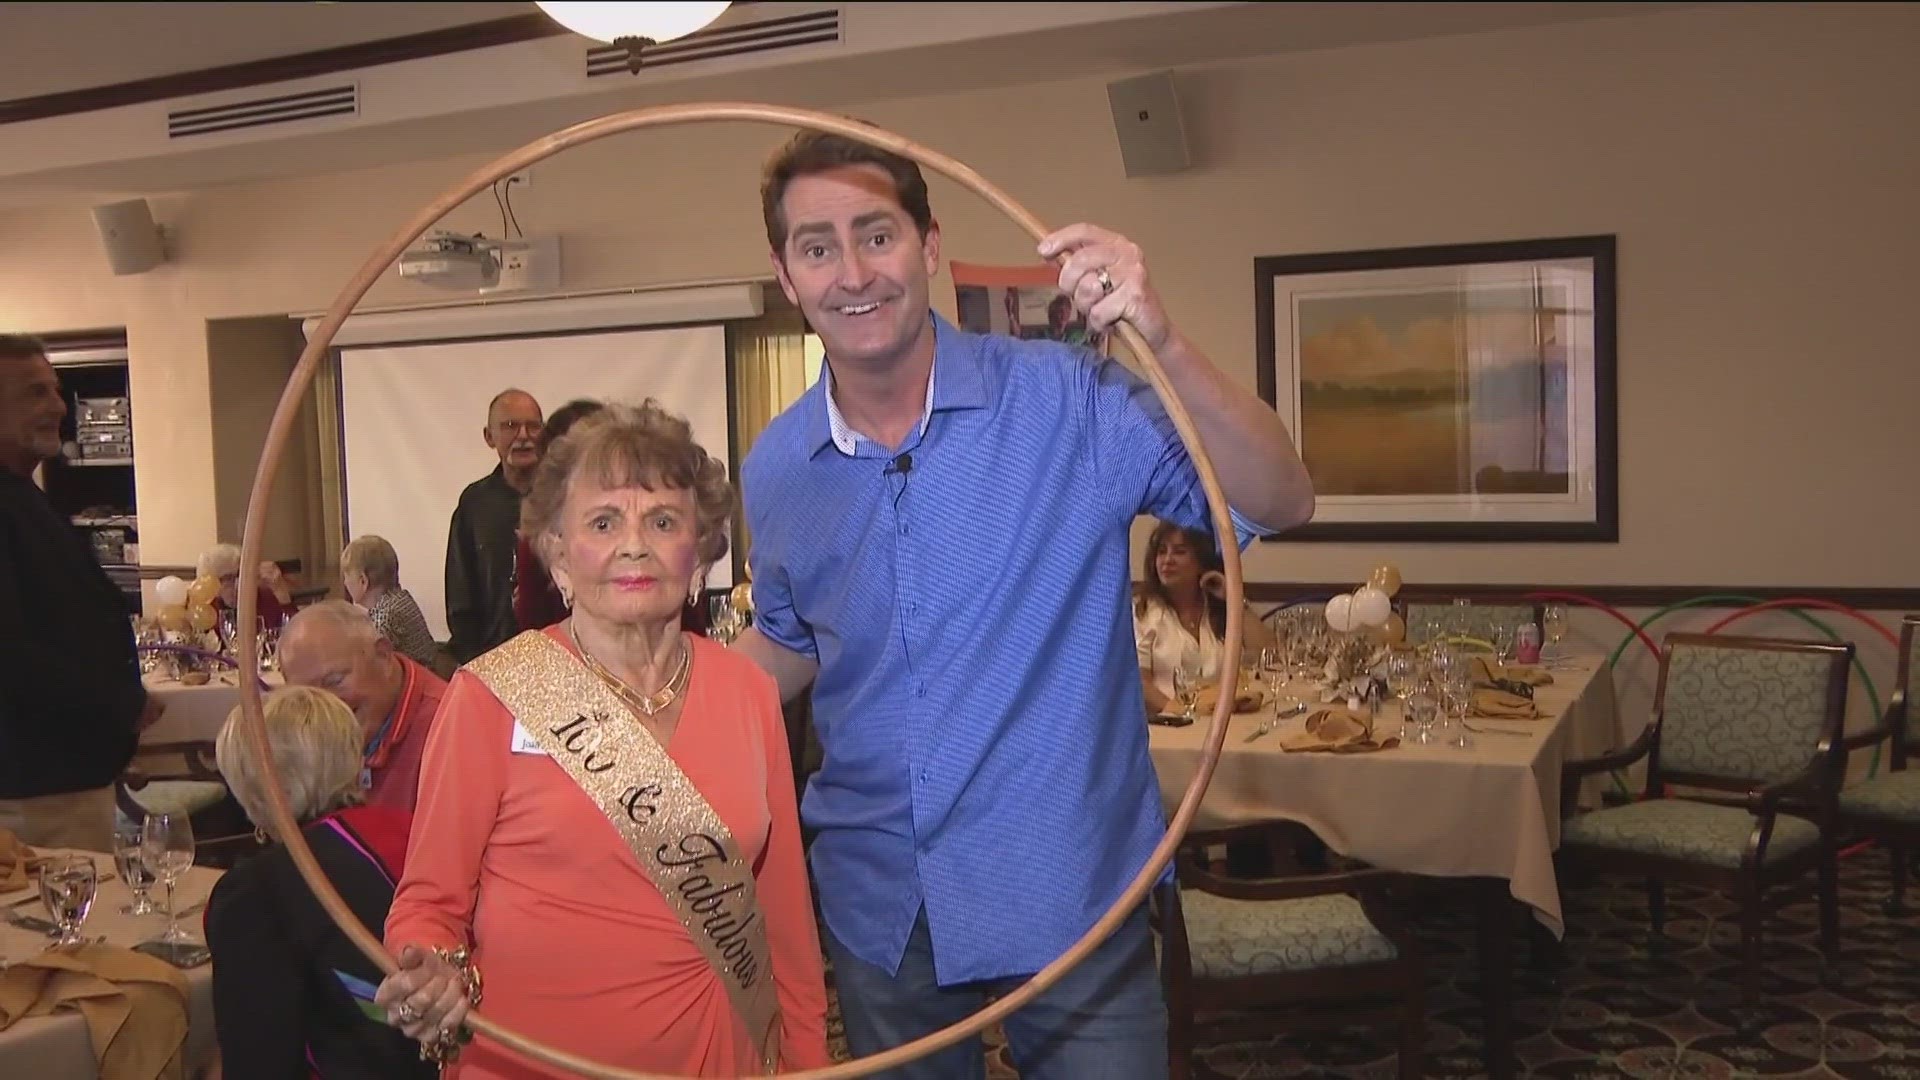 Joan Anderson is still setting the record straight after naming the Hula Hoop in the 1950's.